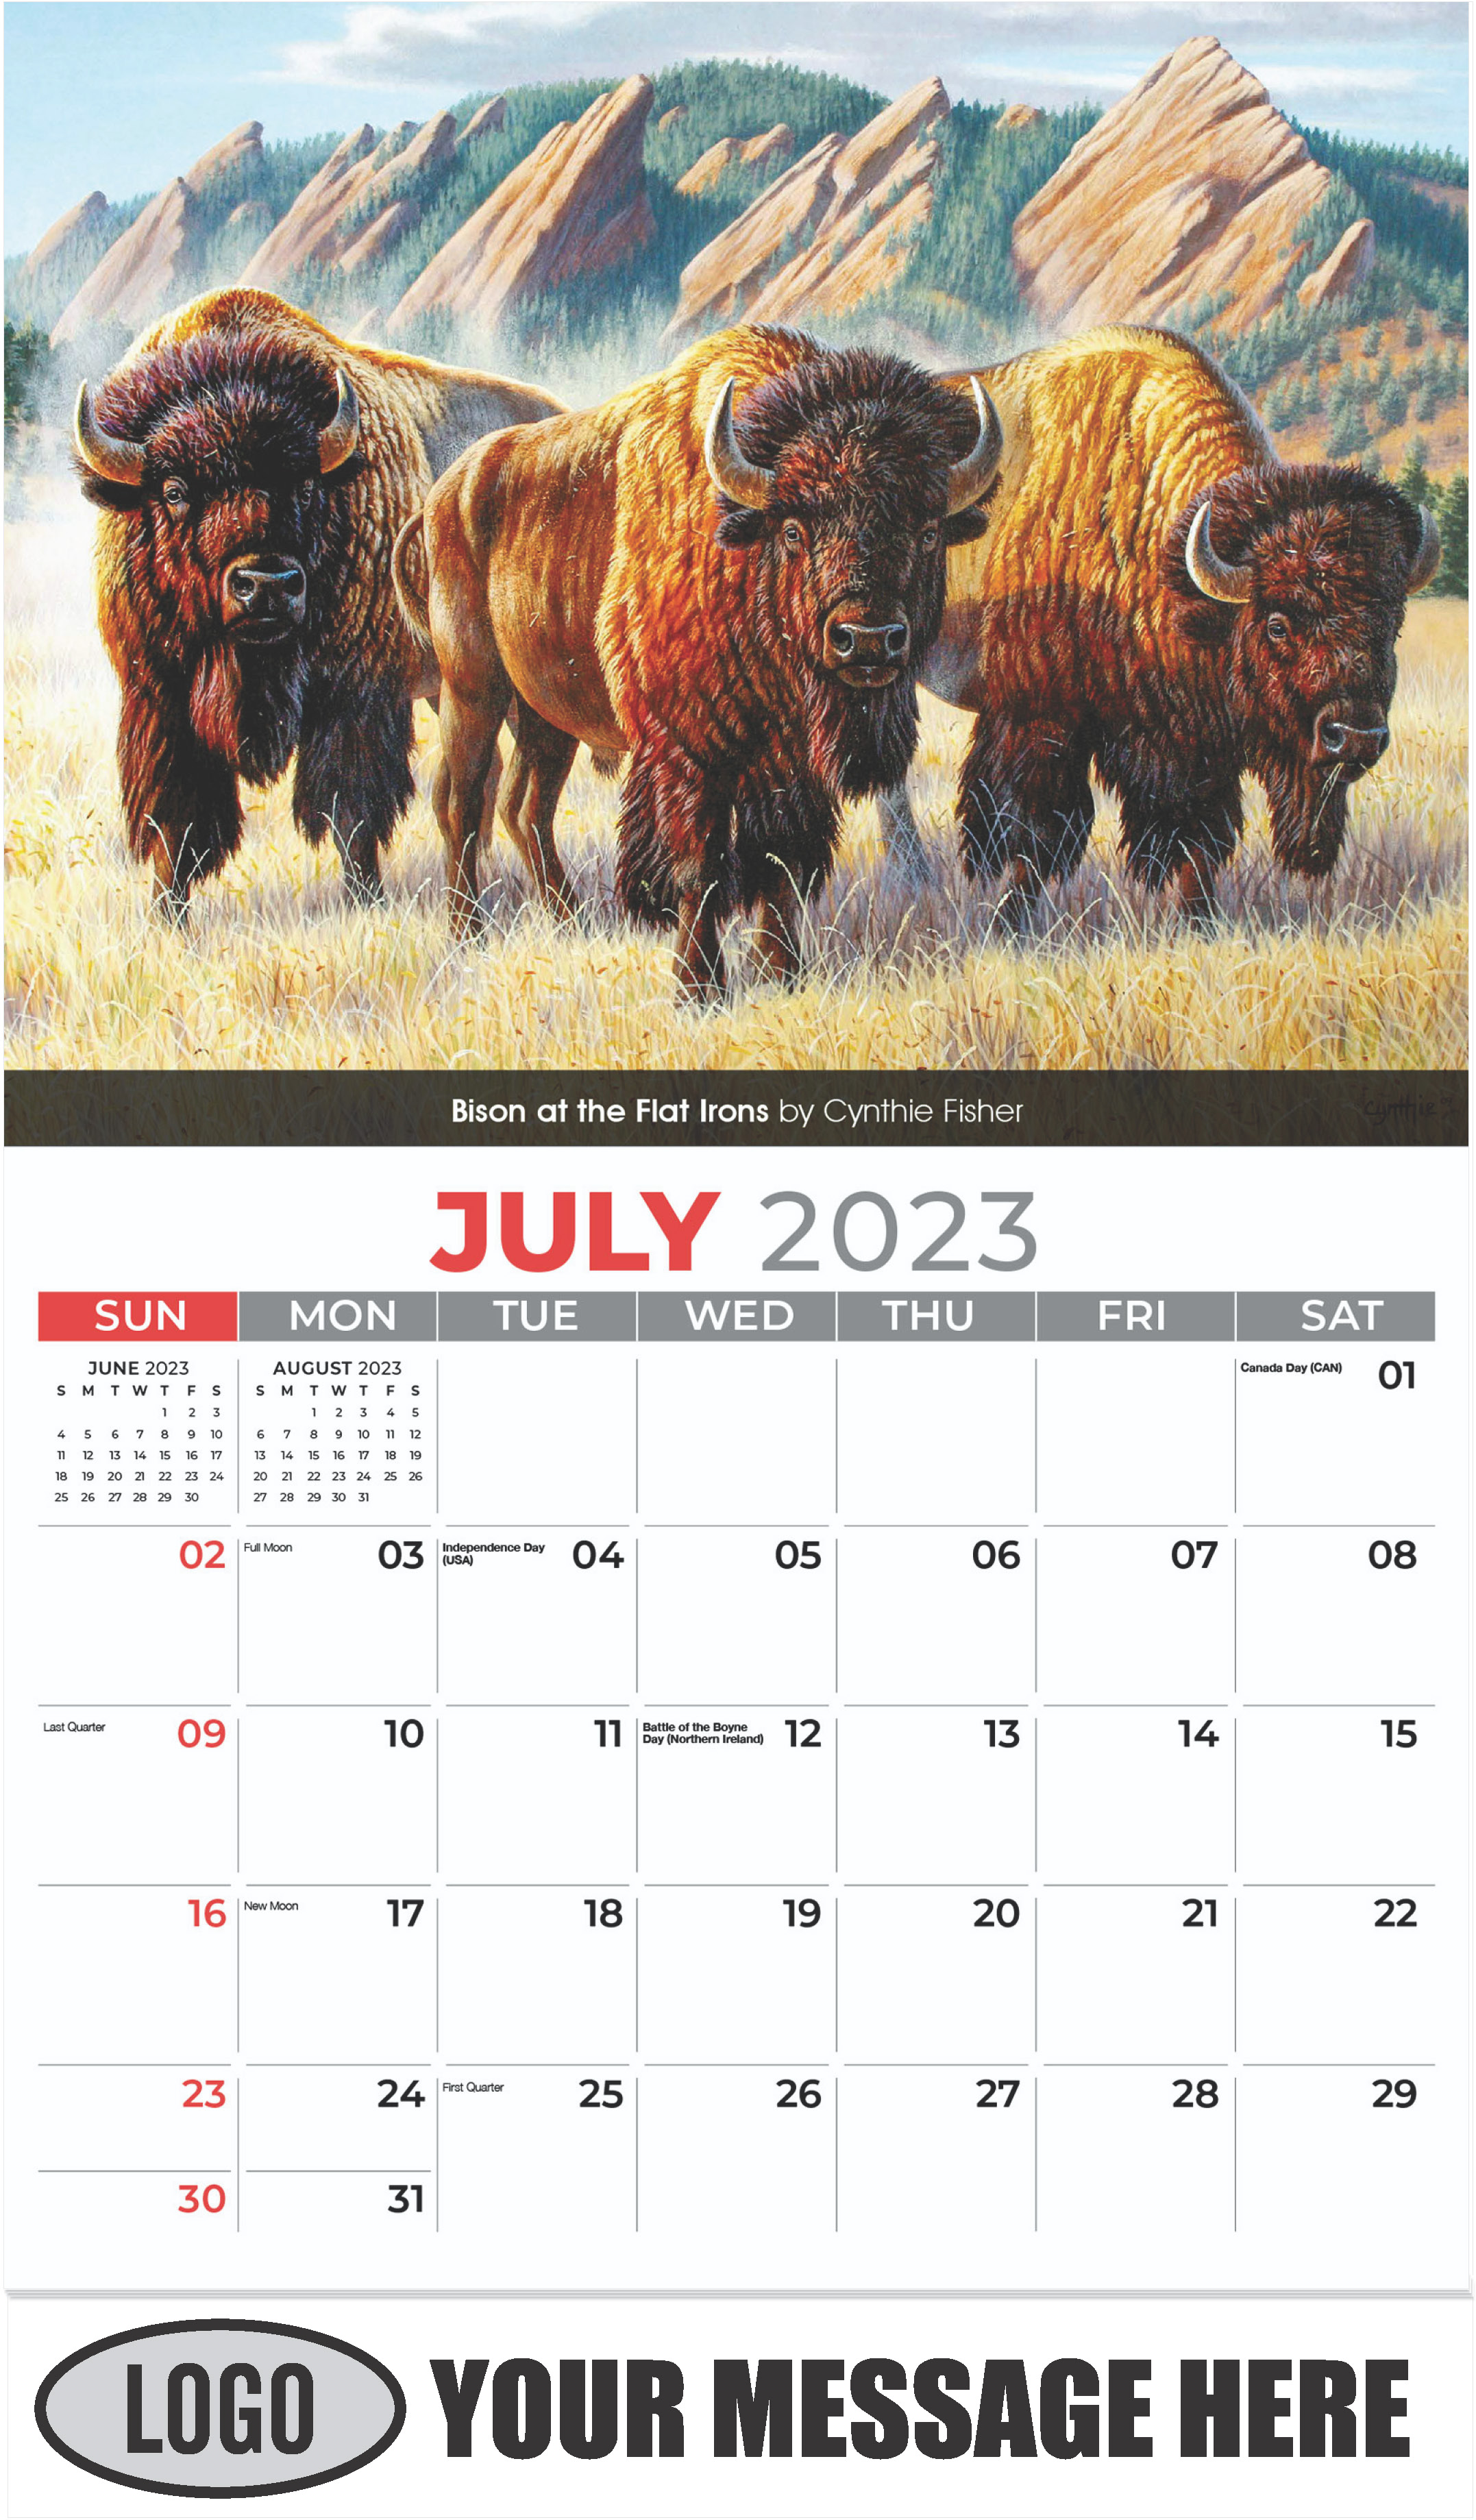 Bison at the Flat Irons by Cynthie Fisher - July - Wildlife Portraits 2023 Promotional Calendar